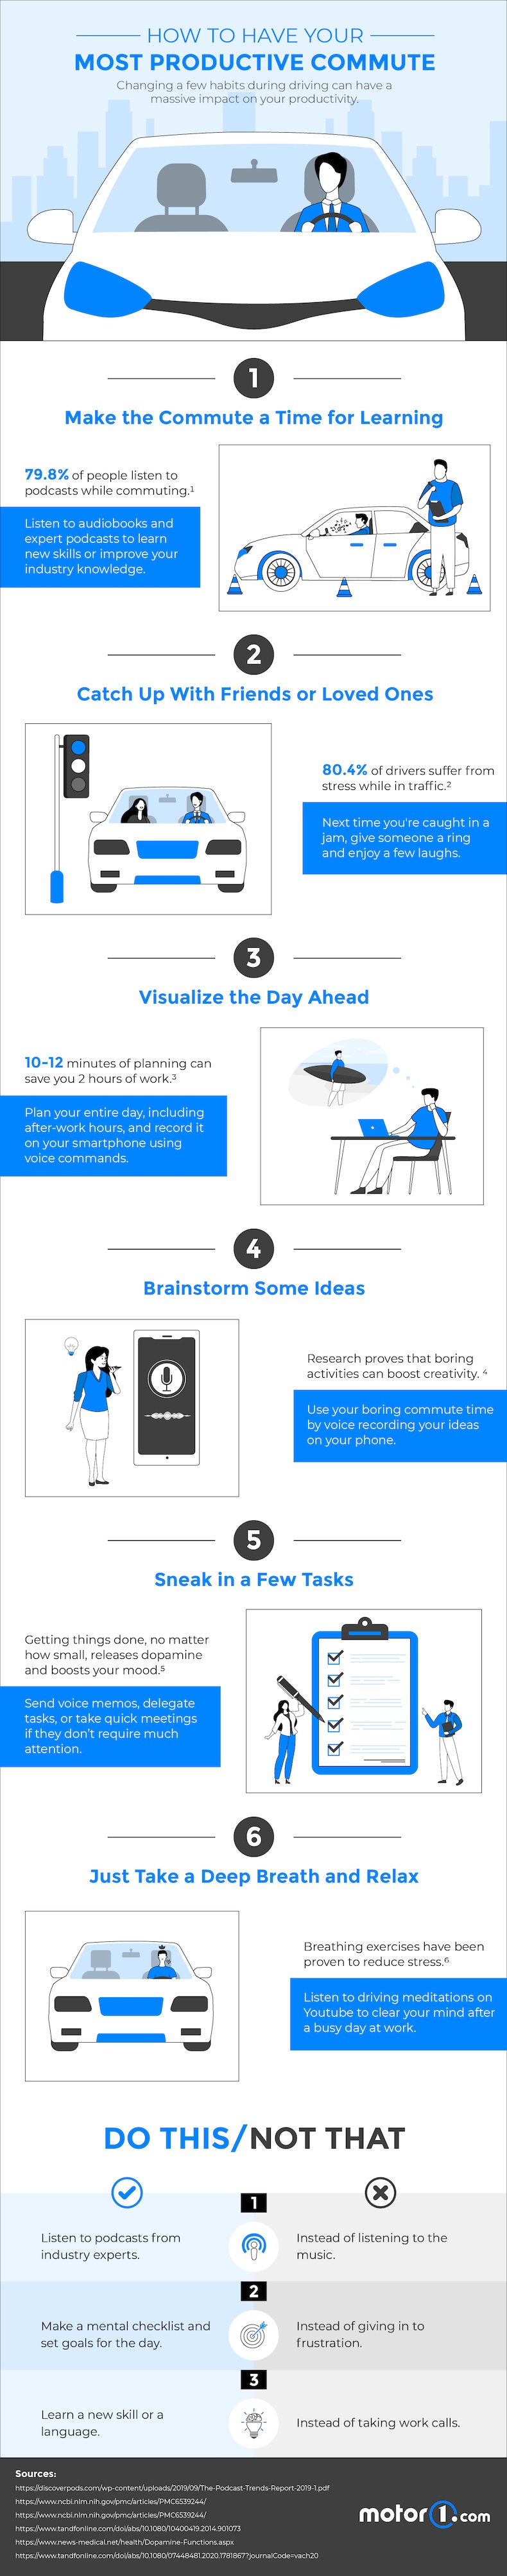 How to have your most productive commute infographic